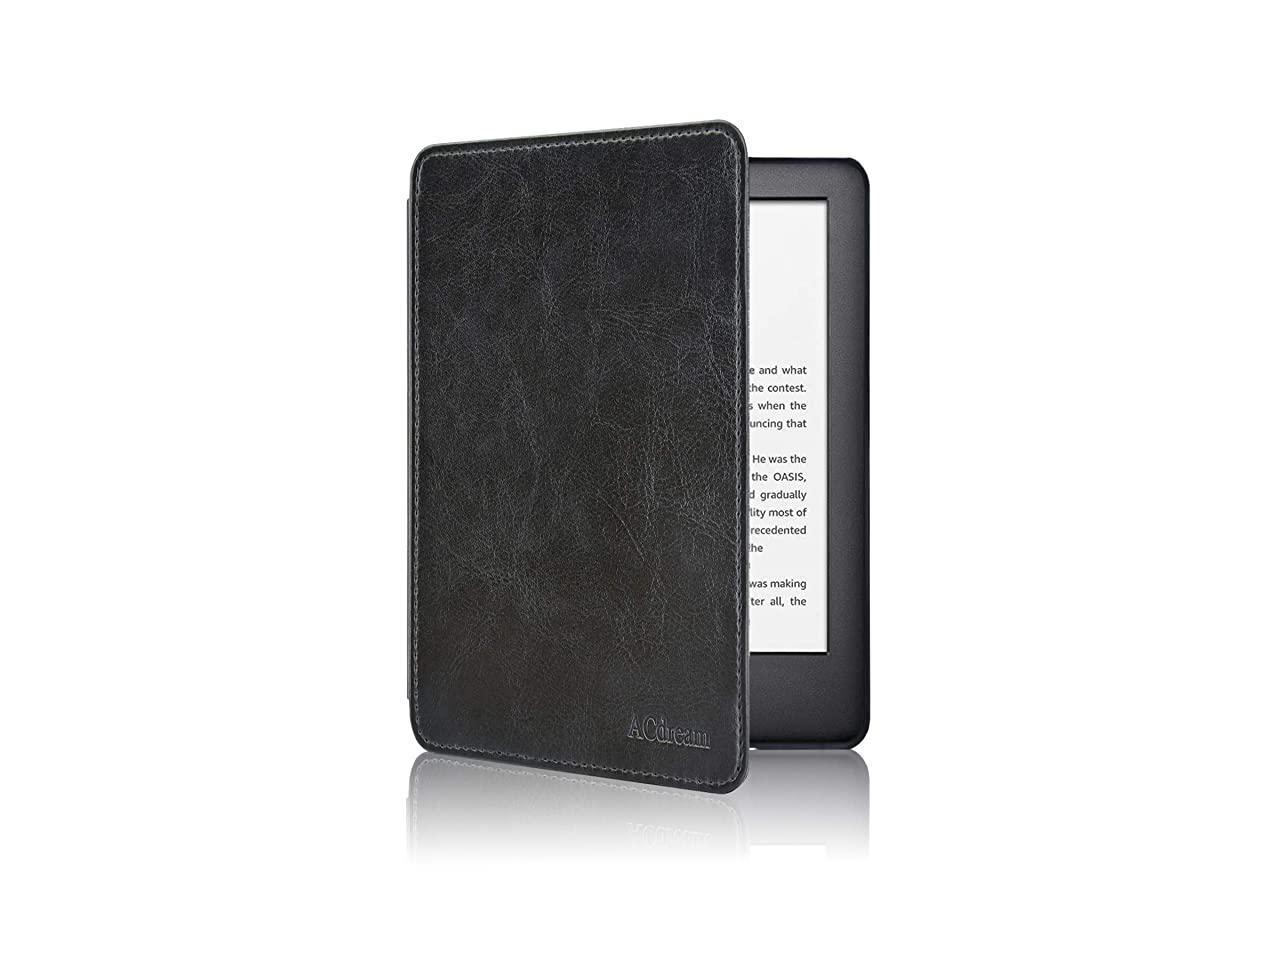 NOT Fit Kindle Paperwhite or Kindle 8th Gen ACdream Slimshell Case for All New Kindle 10th Generation 2019 Released Black ,Premium PU Leather Cover Case with Auto Wake Sleep Feather 